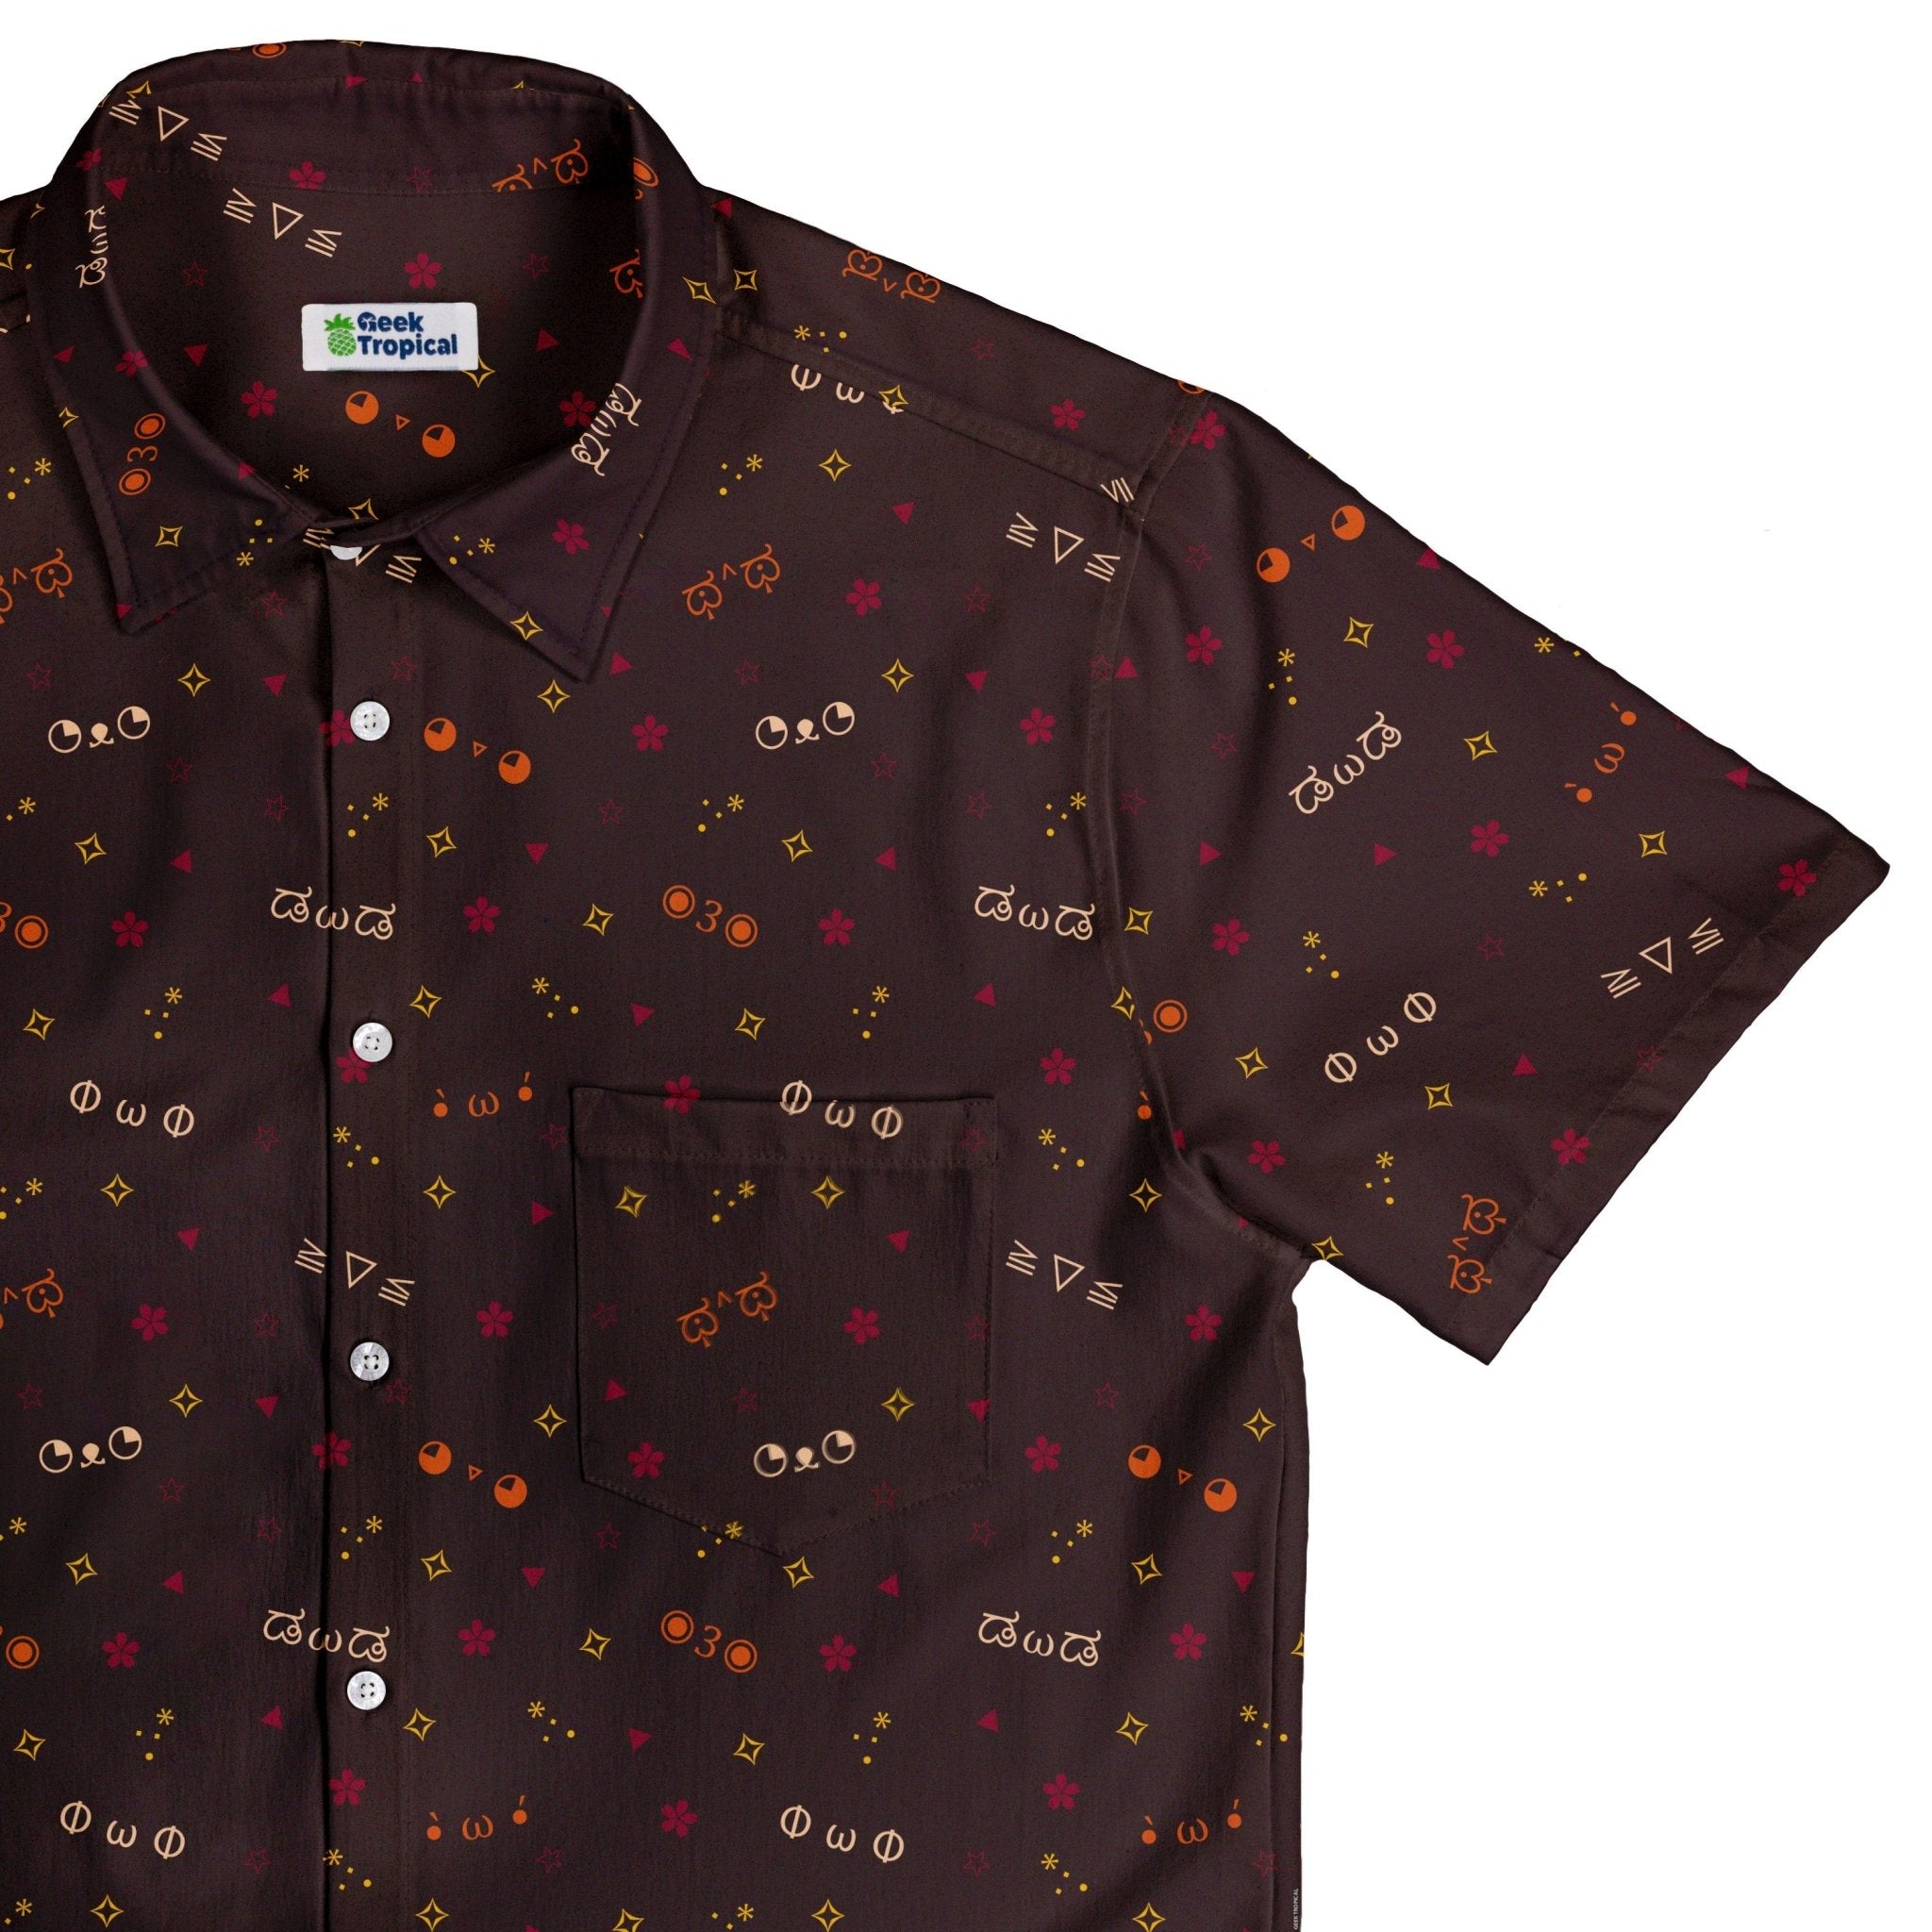 Kao Emojis Red Button Up Shirt - adult sizing - Anime - Design by Ardi Tong